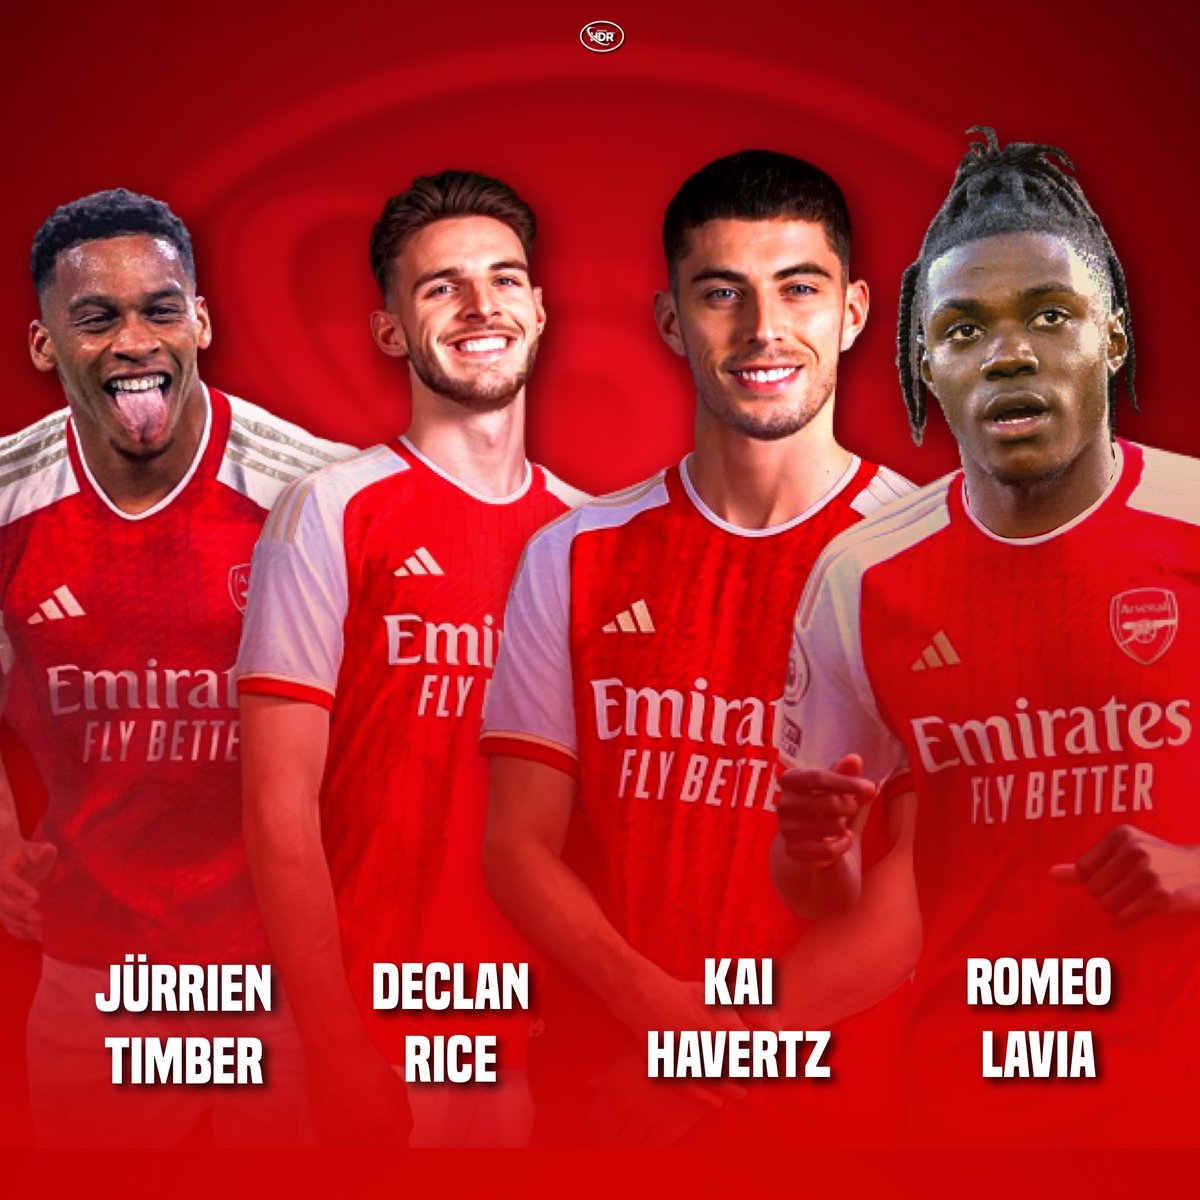 🚨UPDATE:
3 of these people counting from left to right are DONE DEALS.🔴⚪️

#Arsenal Now will focus on shifting players out(outgoings)
Target players no doubt;
Holding, Xhaka already done, Cedric, Mari almost to Monza, Tierney, Runarson, Taveres, Lokonga, Trusty, among others